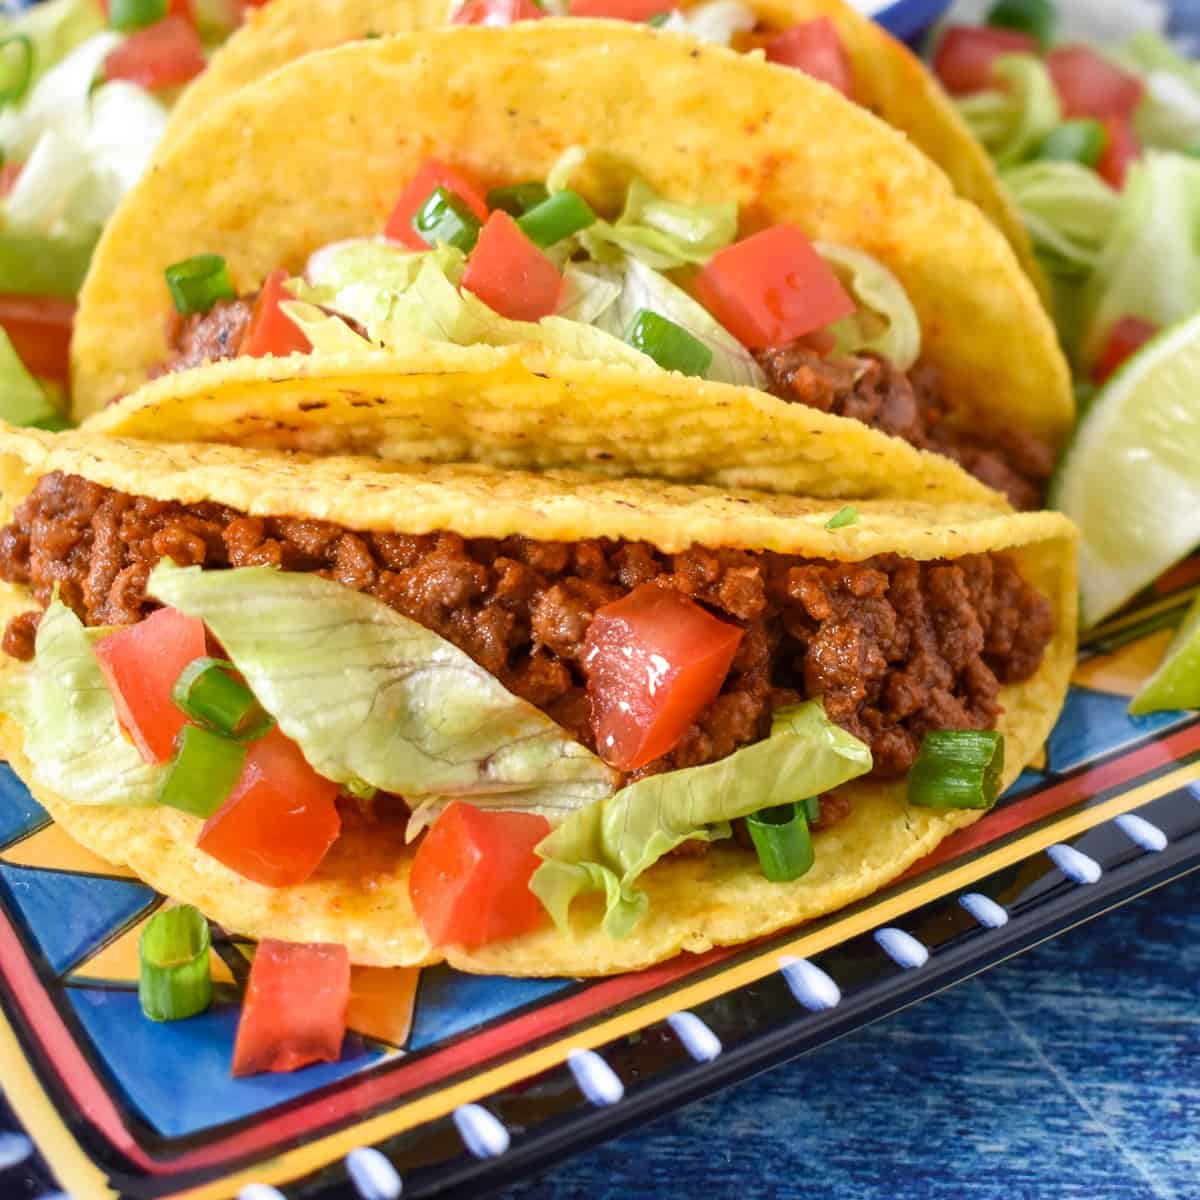 Two tacos in a hard shell topped with lettuce and tomatoes displayed on a colorful plate on a blue table.